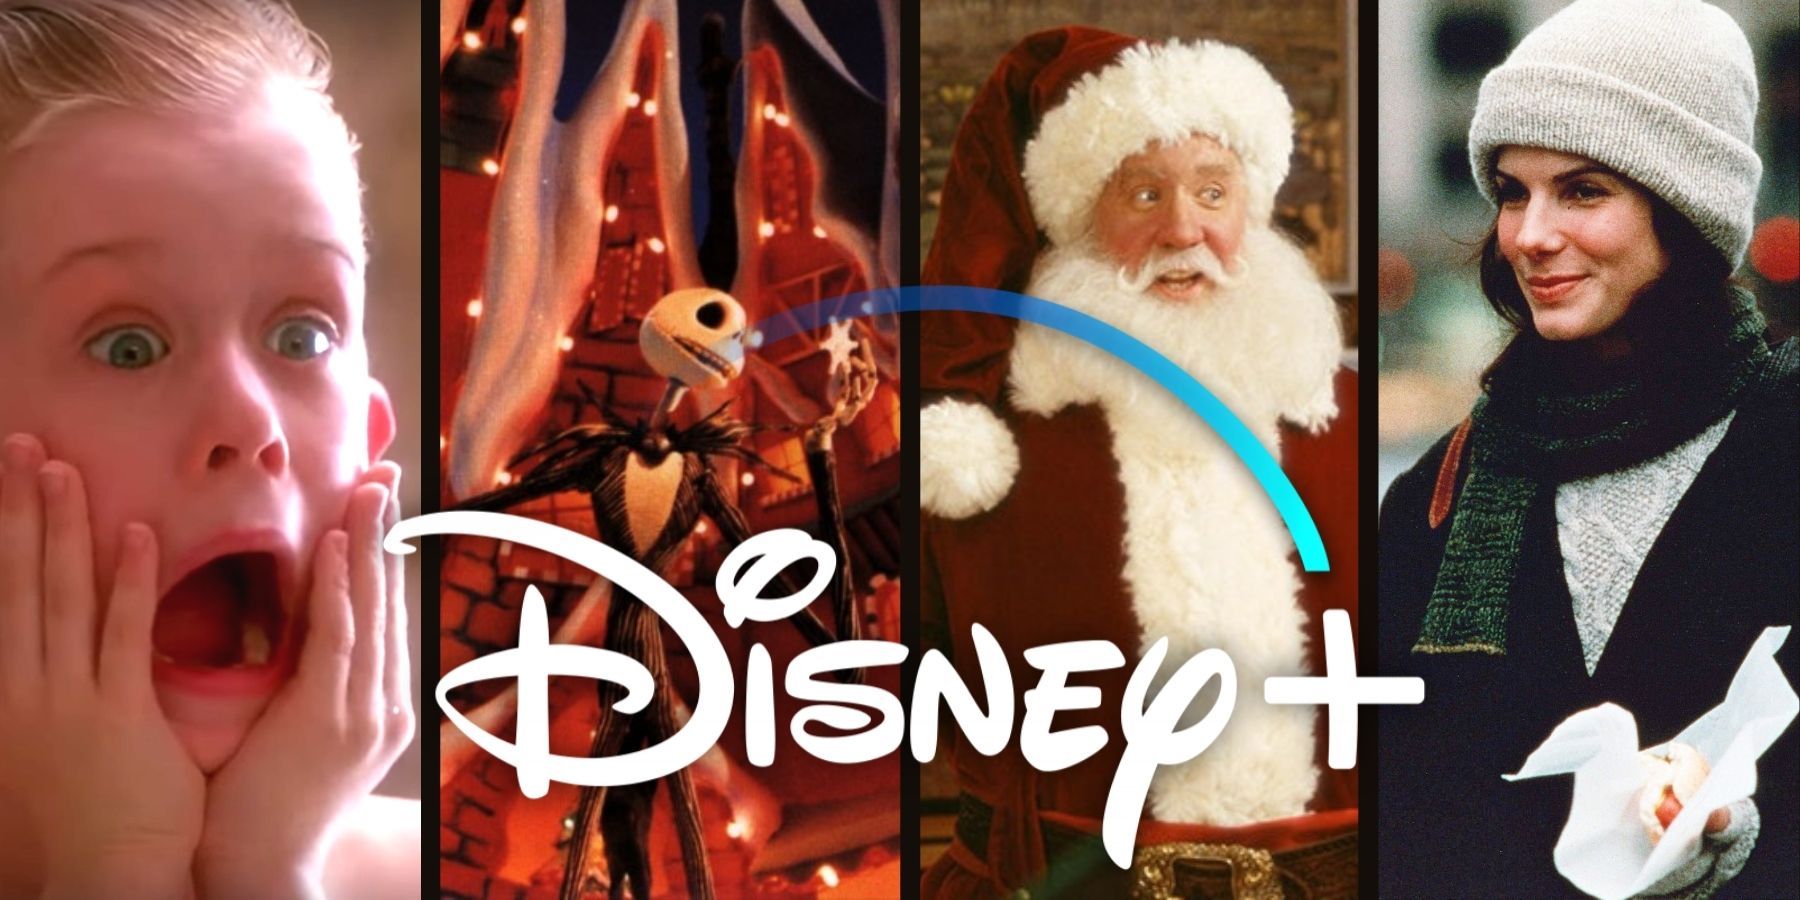 Disney Plus Christmas Movies (Home Alone, Nightmare Before Christmas, The Santa Clause, While You Were Sleeping)